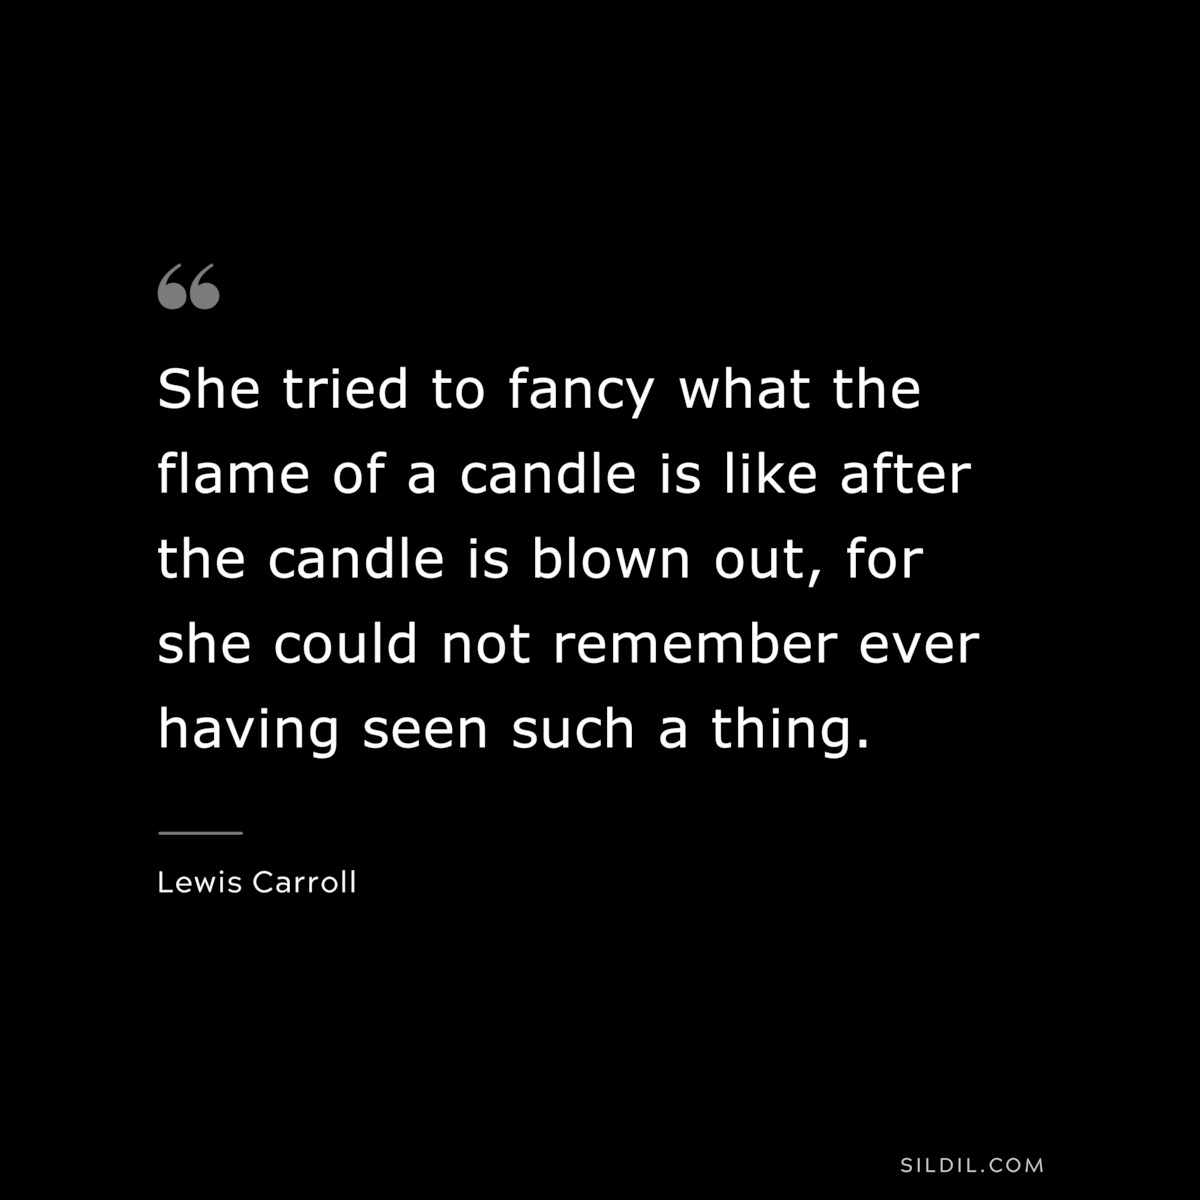 She tried to fancy what the flame of a candle is like after the candle is blown out, for she could not remember ever having seen such a thing.